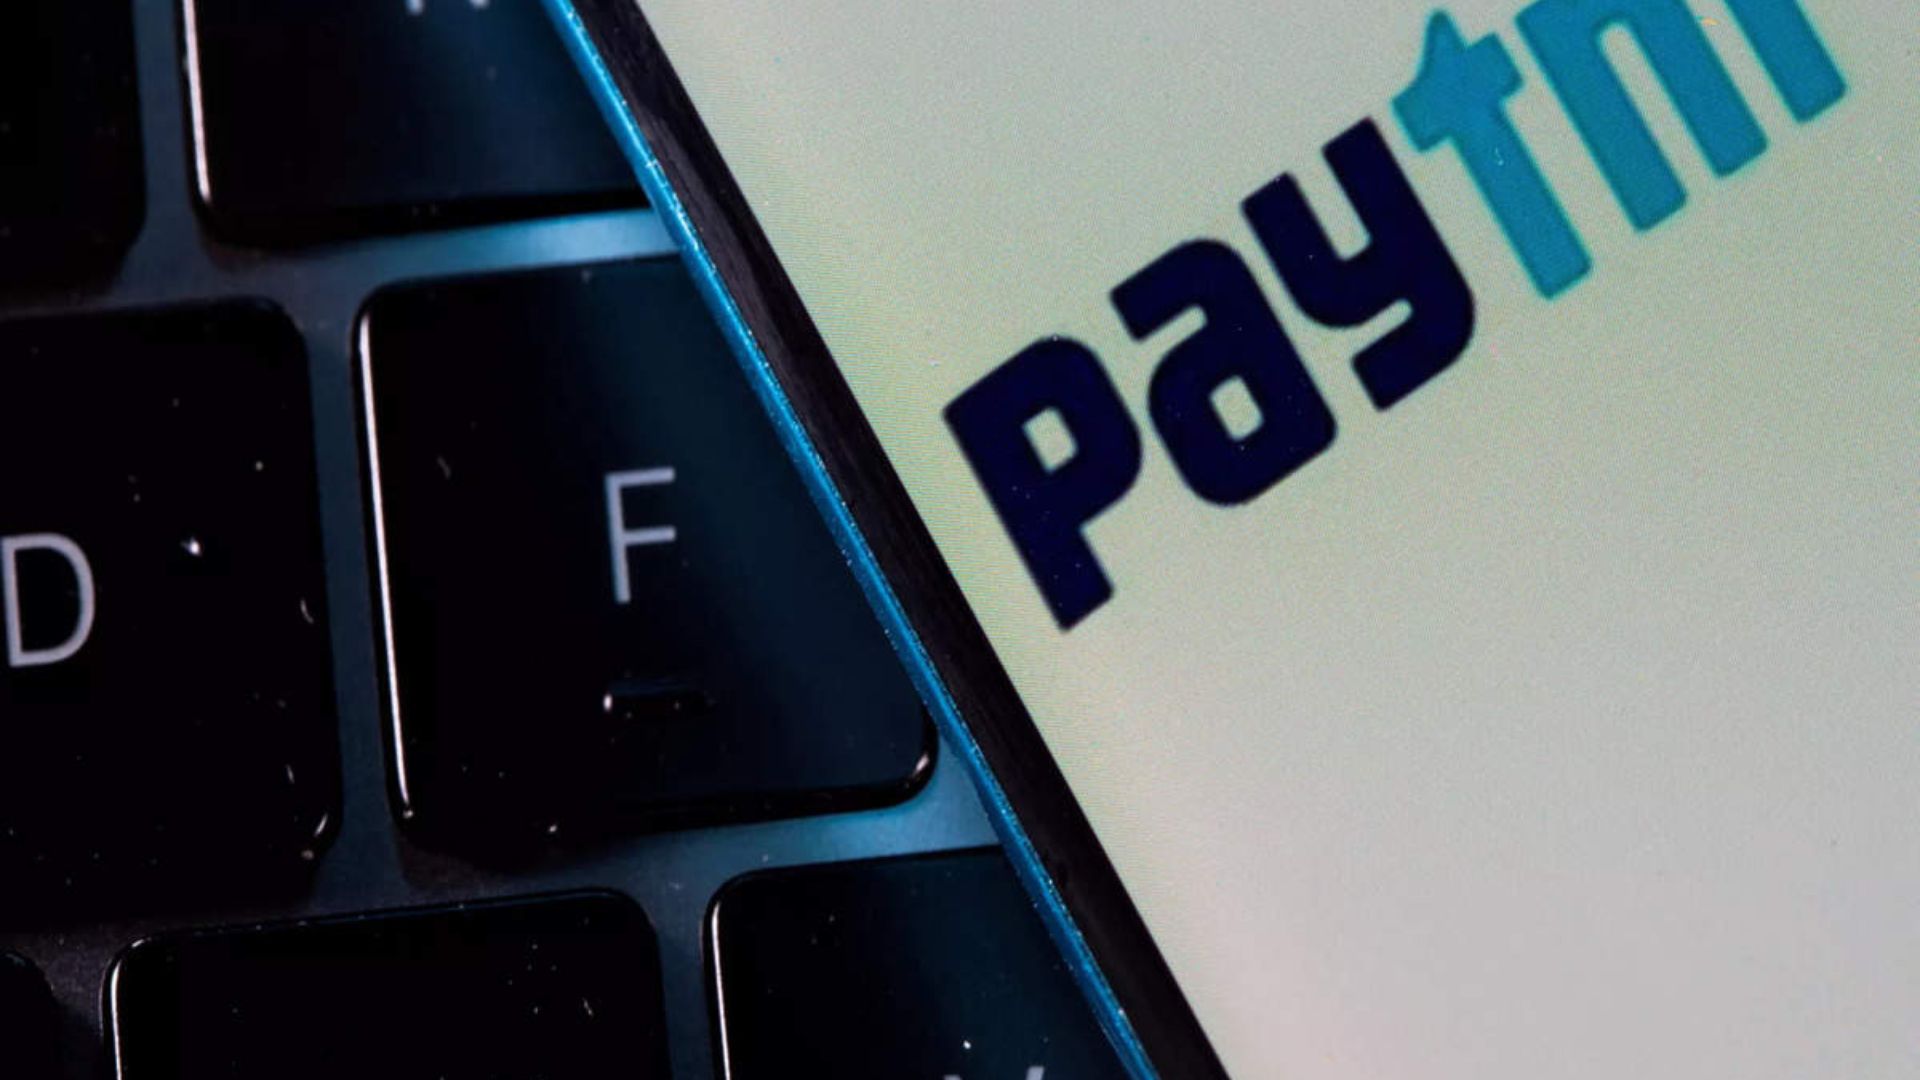 Paytm Shares Fall 5% After COO Bhavesh Gupta’s Resignation